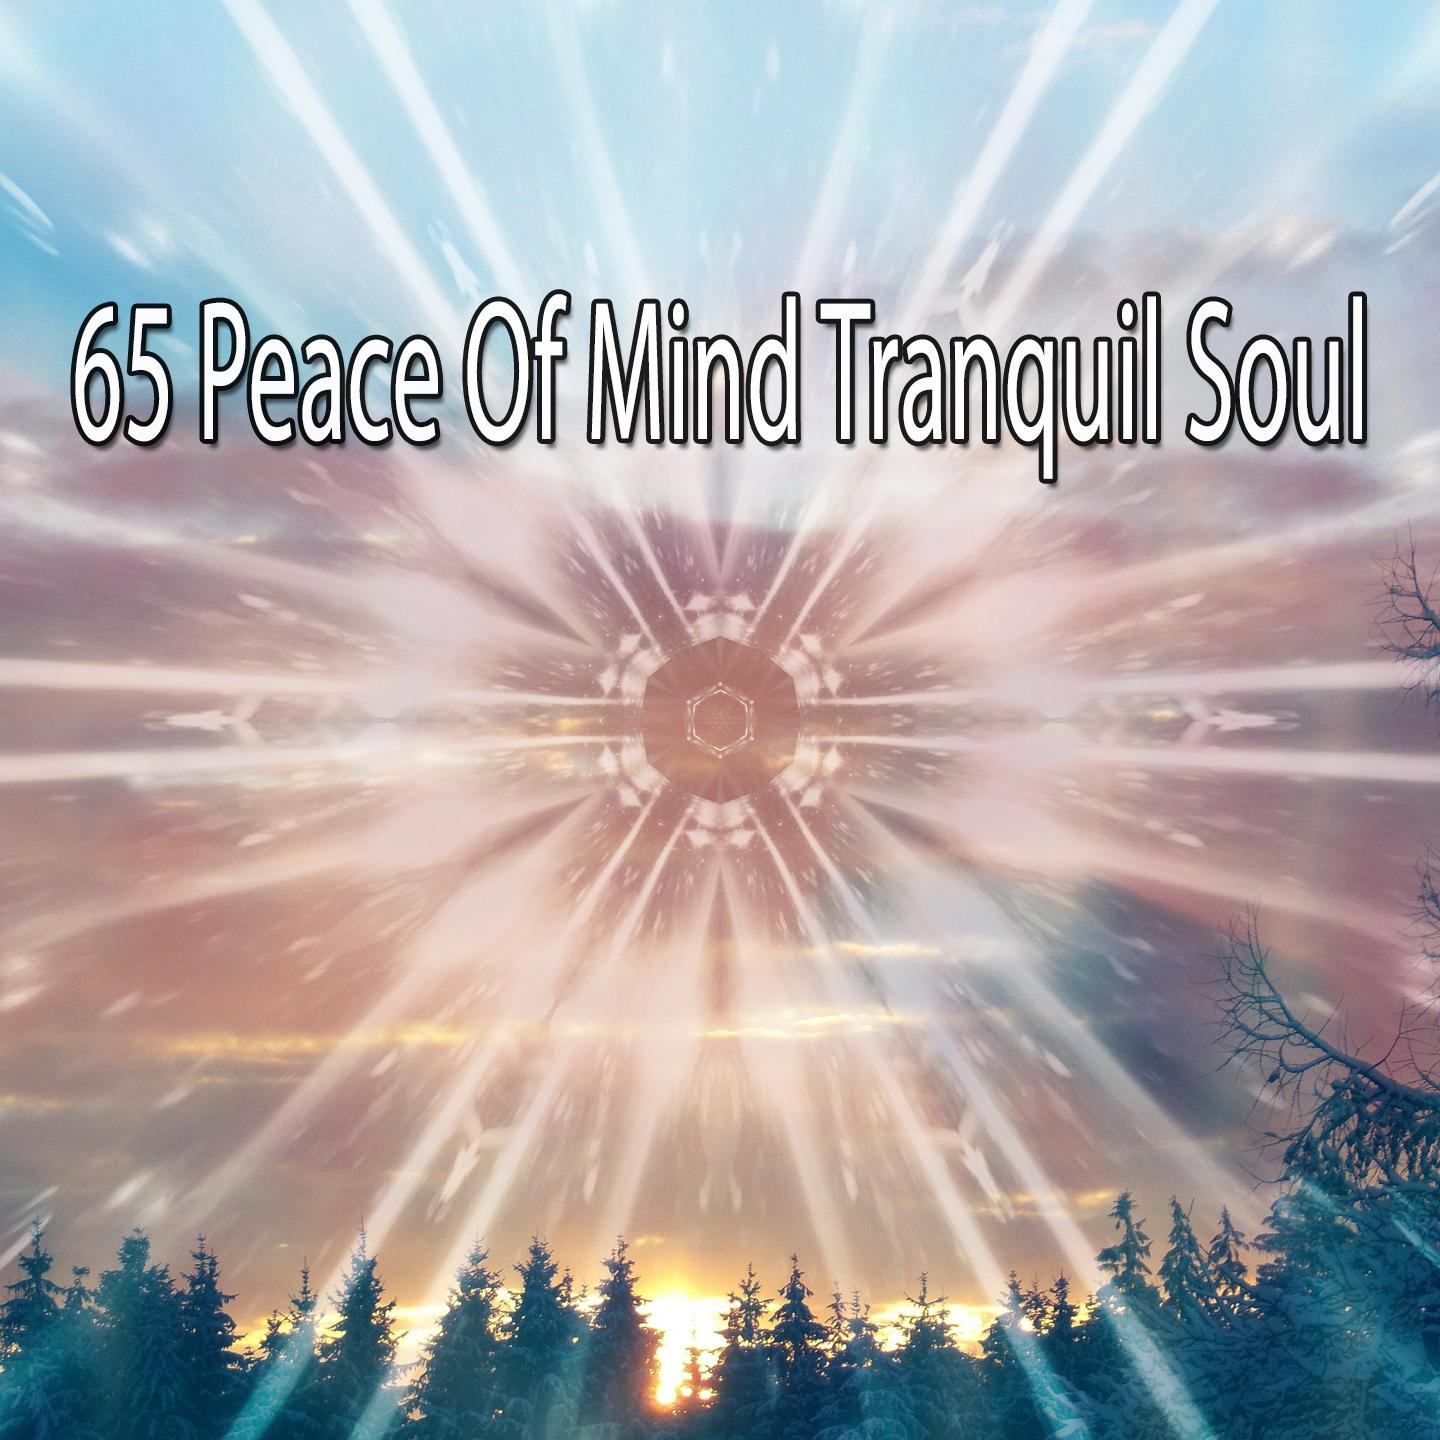 65 Peace of Mind Tranquil Soul